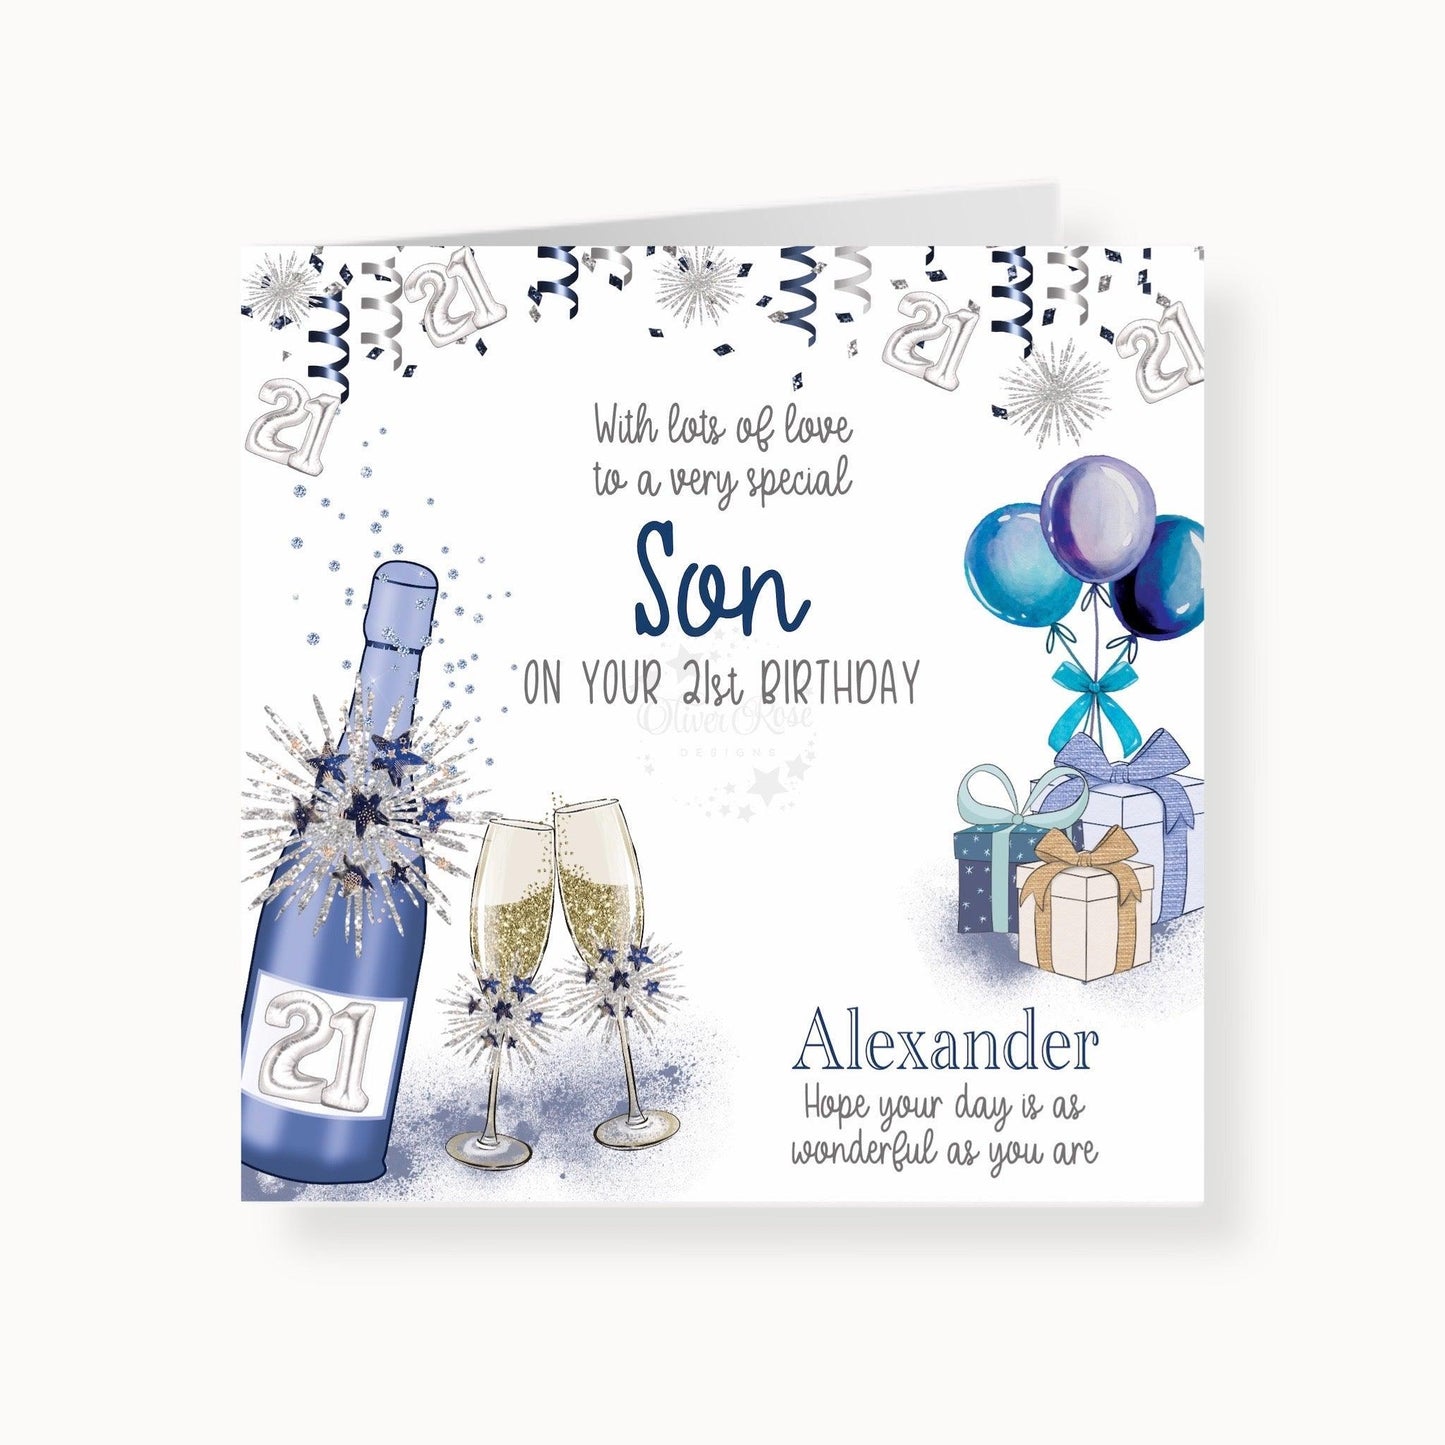 With lots of love to a very special SON on your 21st Birthday, 21st Birthday Card, Blue & Silver effect, Confetti, Bottle of Bubbly, 2 Glasses, Balloons & Presents. Personalised Name, Hope your day is as wonderful as you are (6 inches Square) Blank Inside